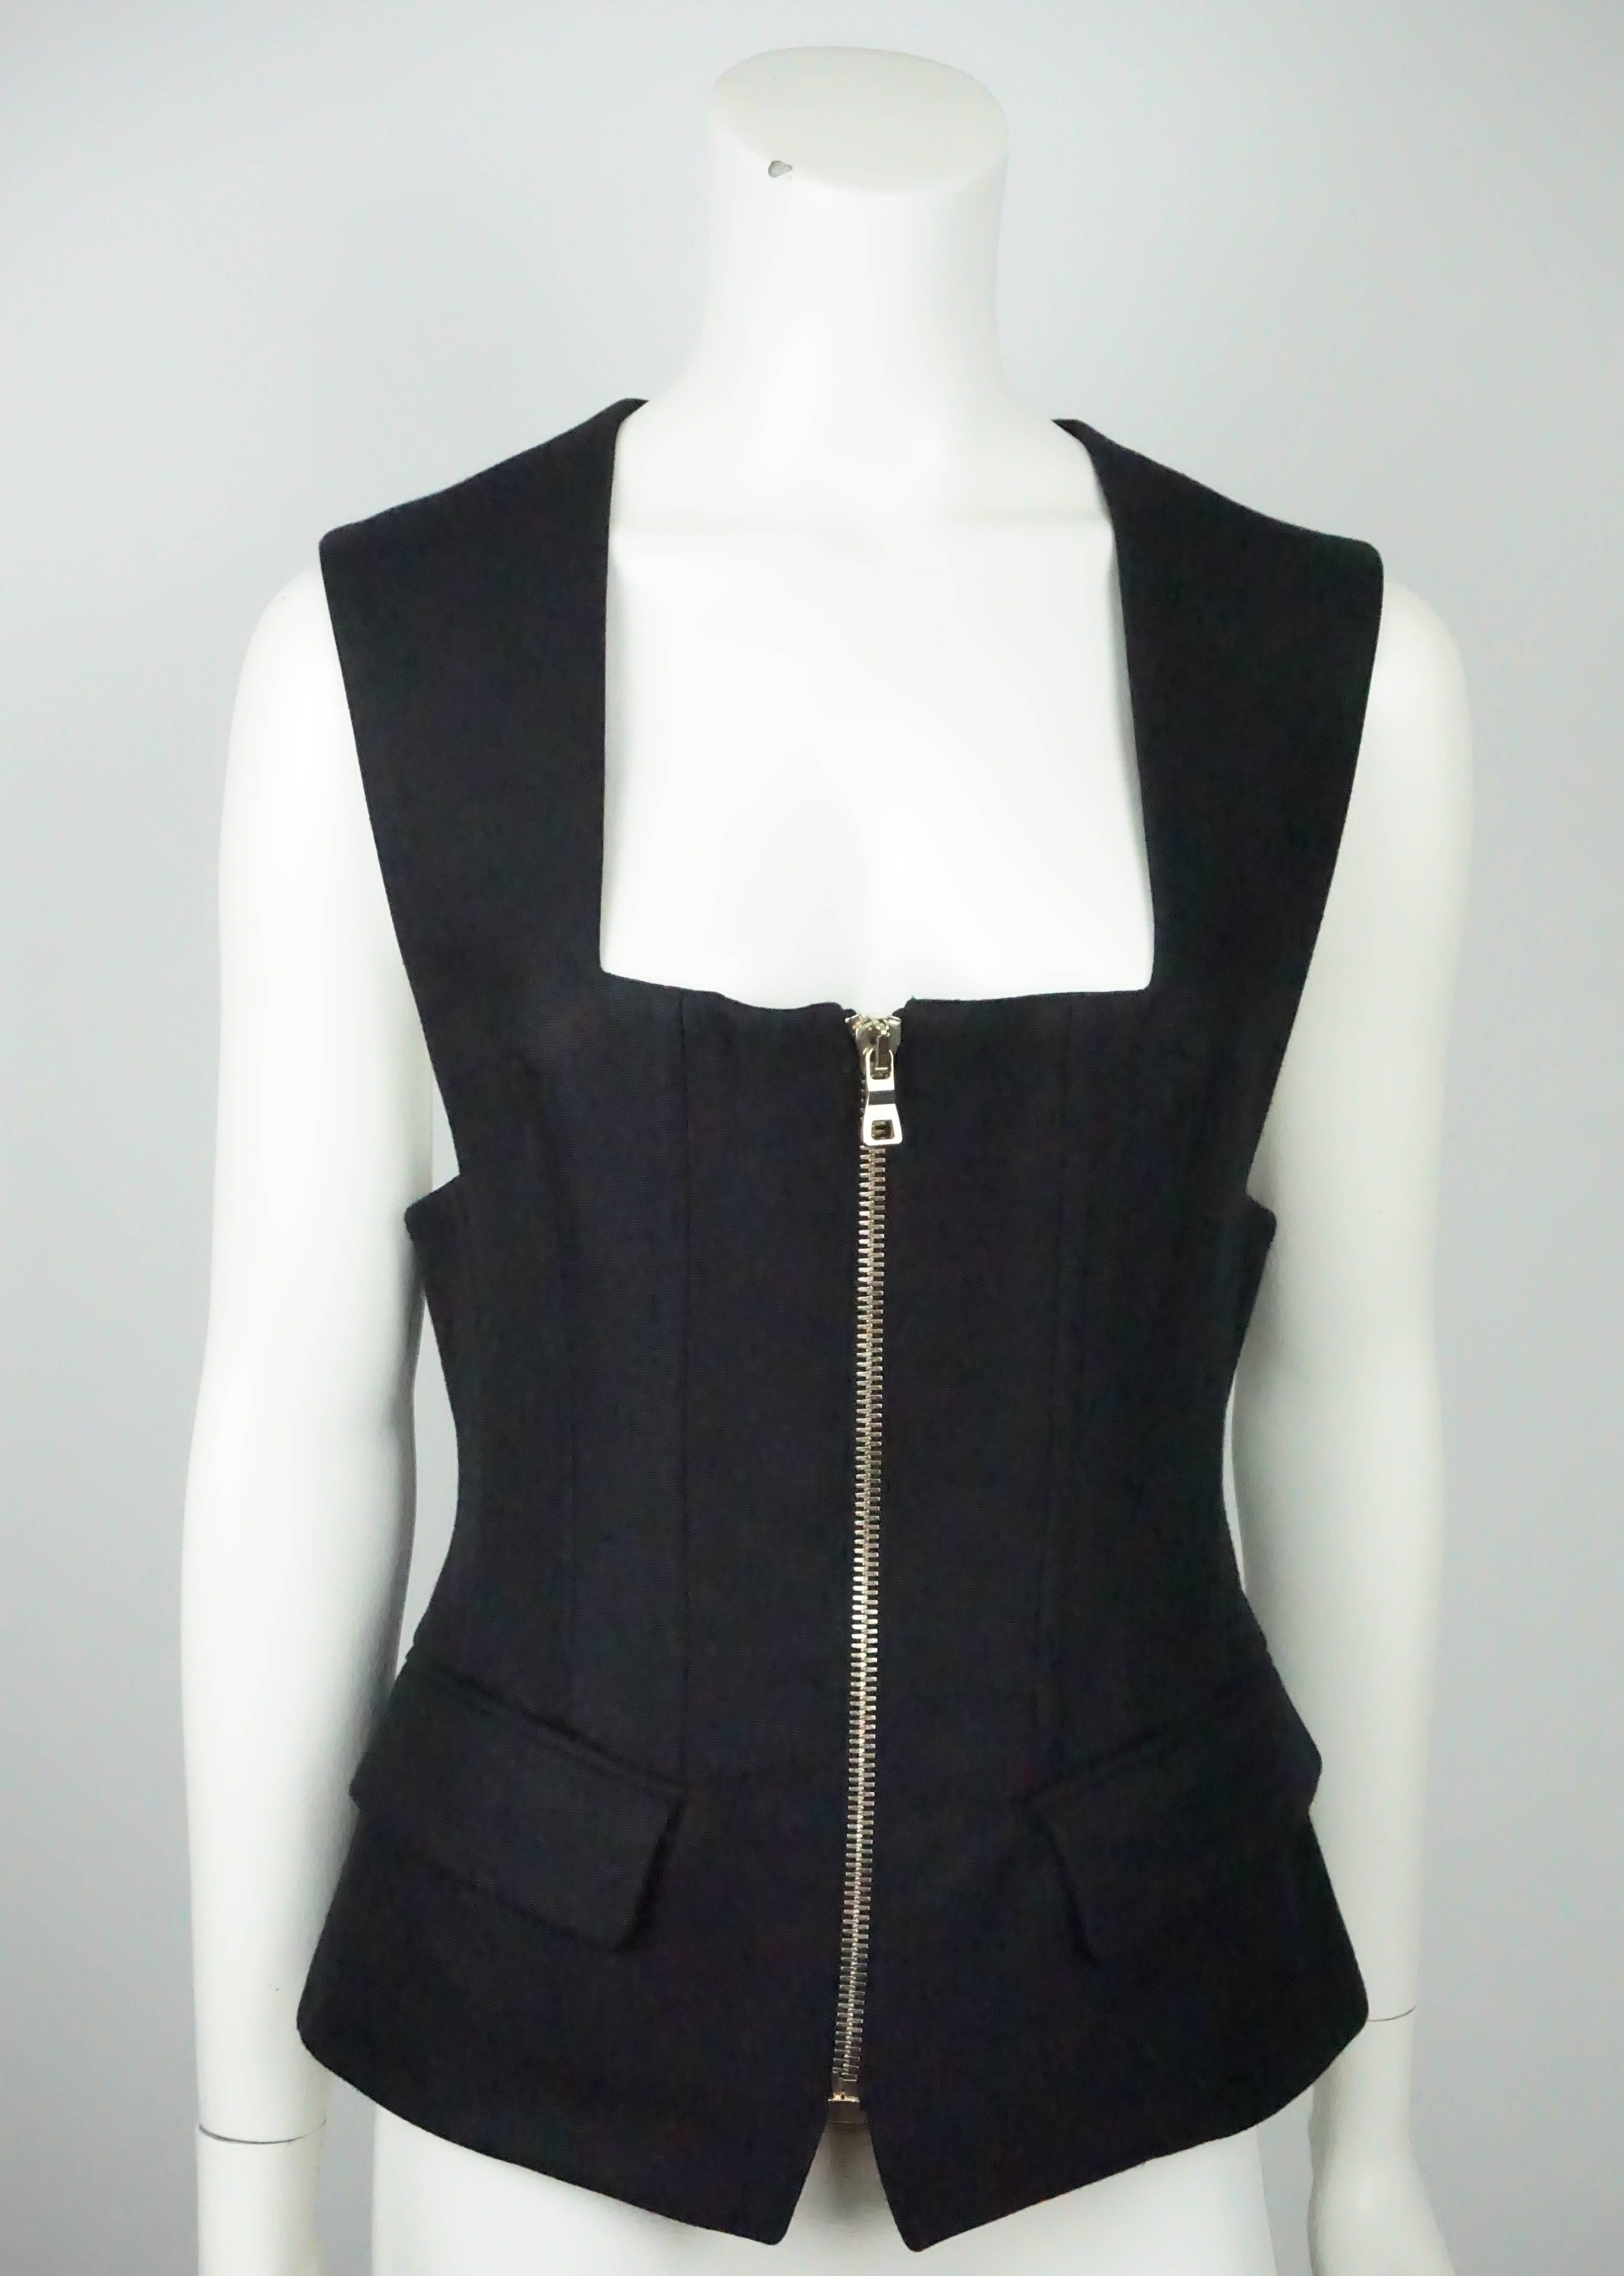 Balmain Black Sleeveless Silk Blended Vest Top - 40  This unique top is in excellent condition. The top is built like a bustier because it has bones on the entire body of the top. There is a gold separating zipper going down the front. There are two